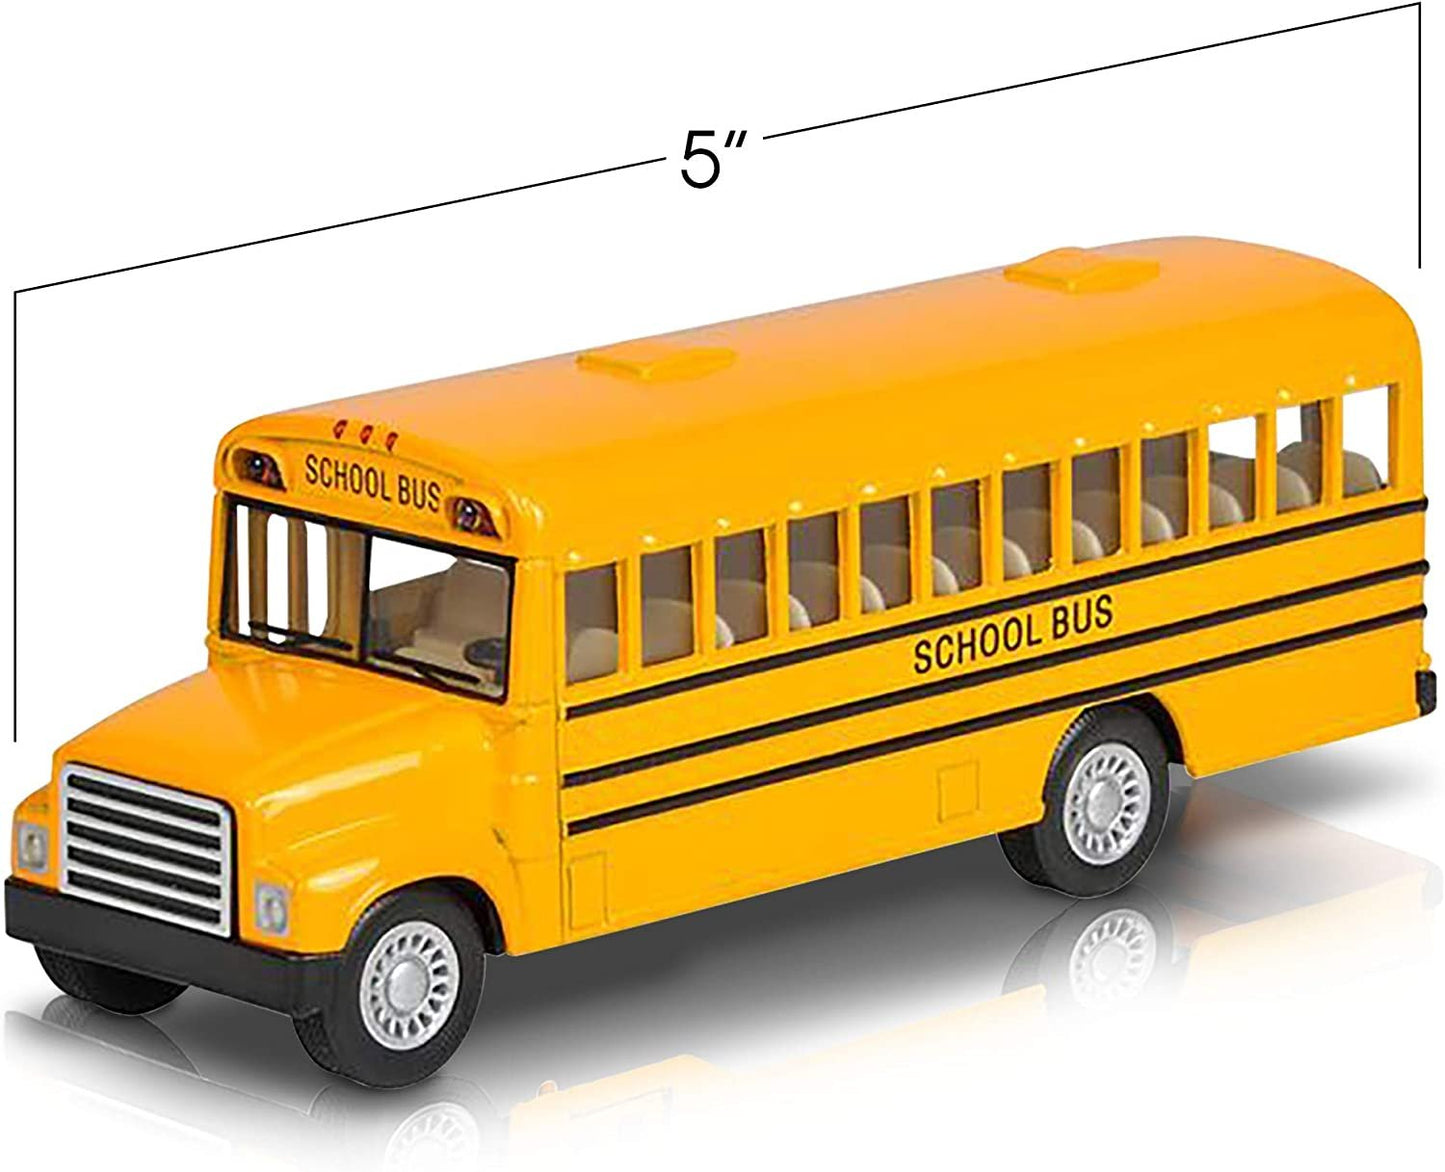 ArtCreativity 5 Inch Pull Back School Bus Toy - Set of 2 - Includes 2, 5 Inch Classic School Bus - Diecast Bus Playset with Pull Back Mechanisms - Great Gift Idea for Boys and Girls